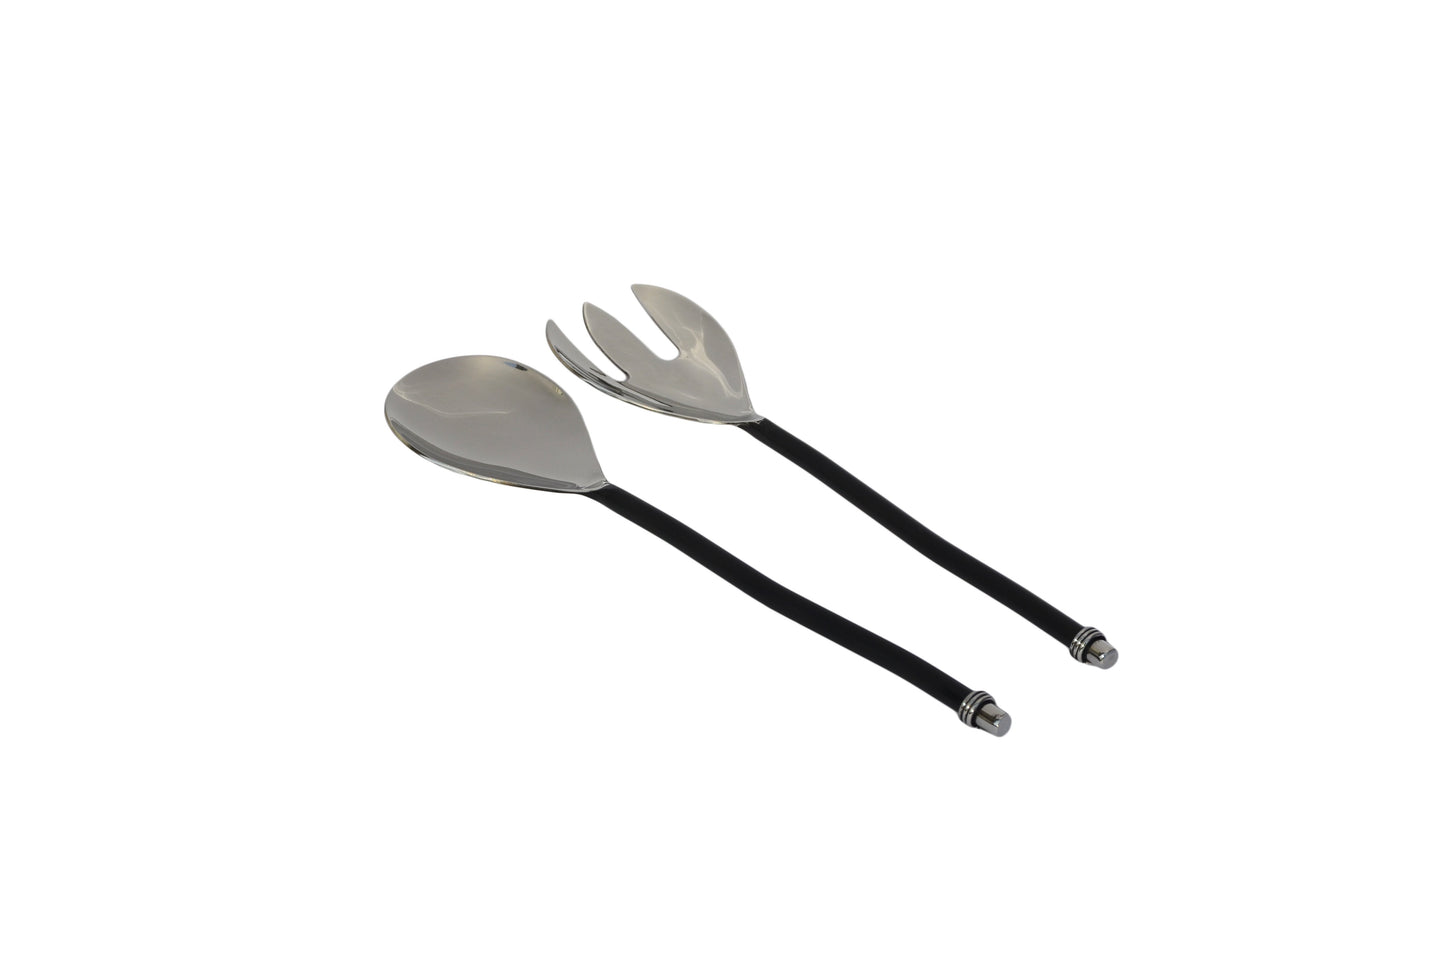 Black Stainless Steel Server Set | Black Fork and Spoon with Wire Top